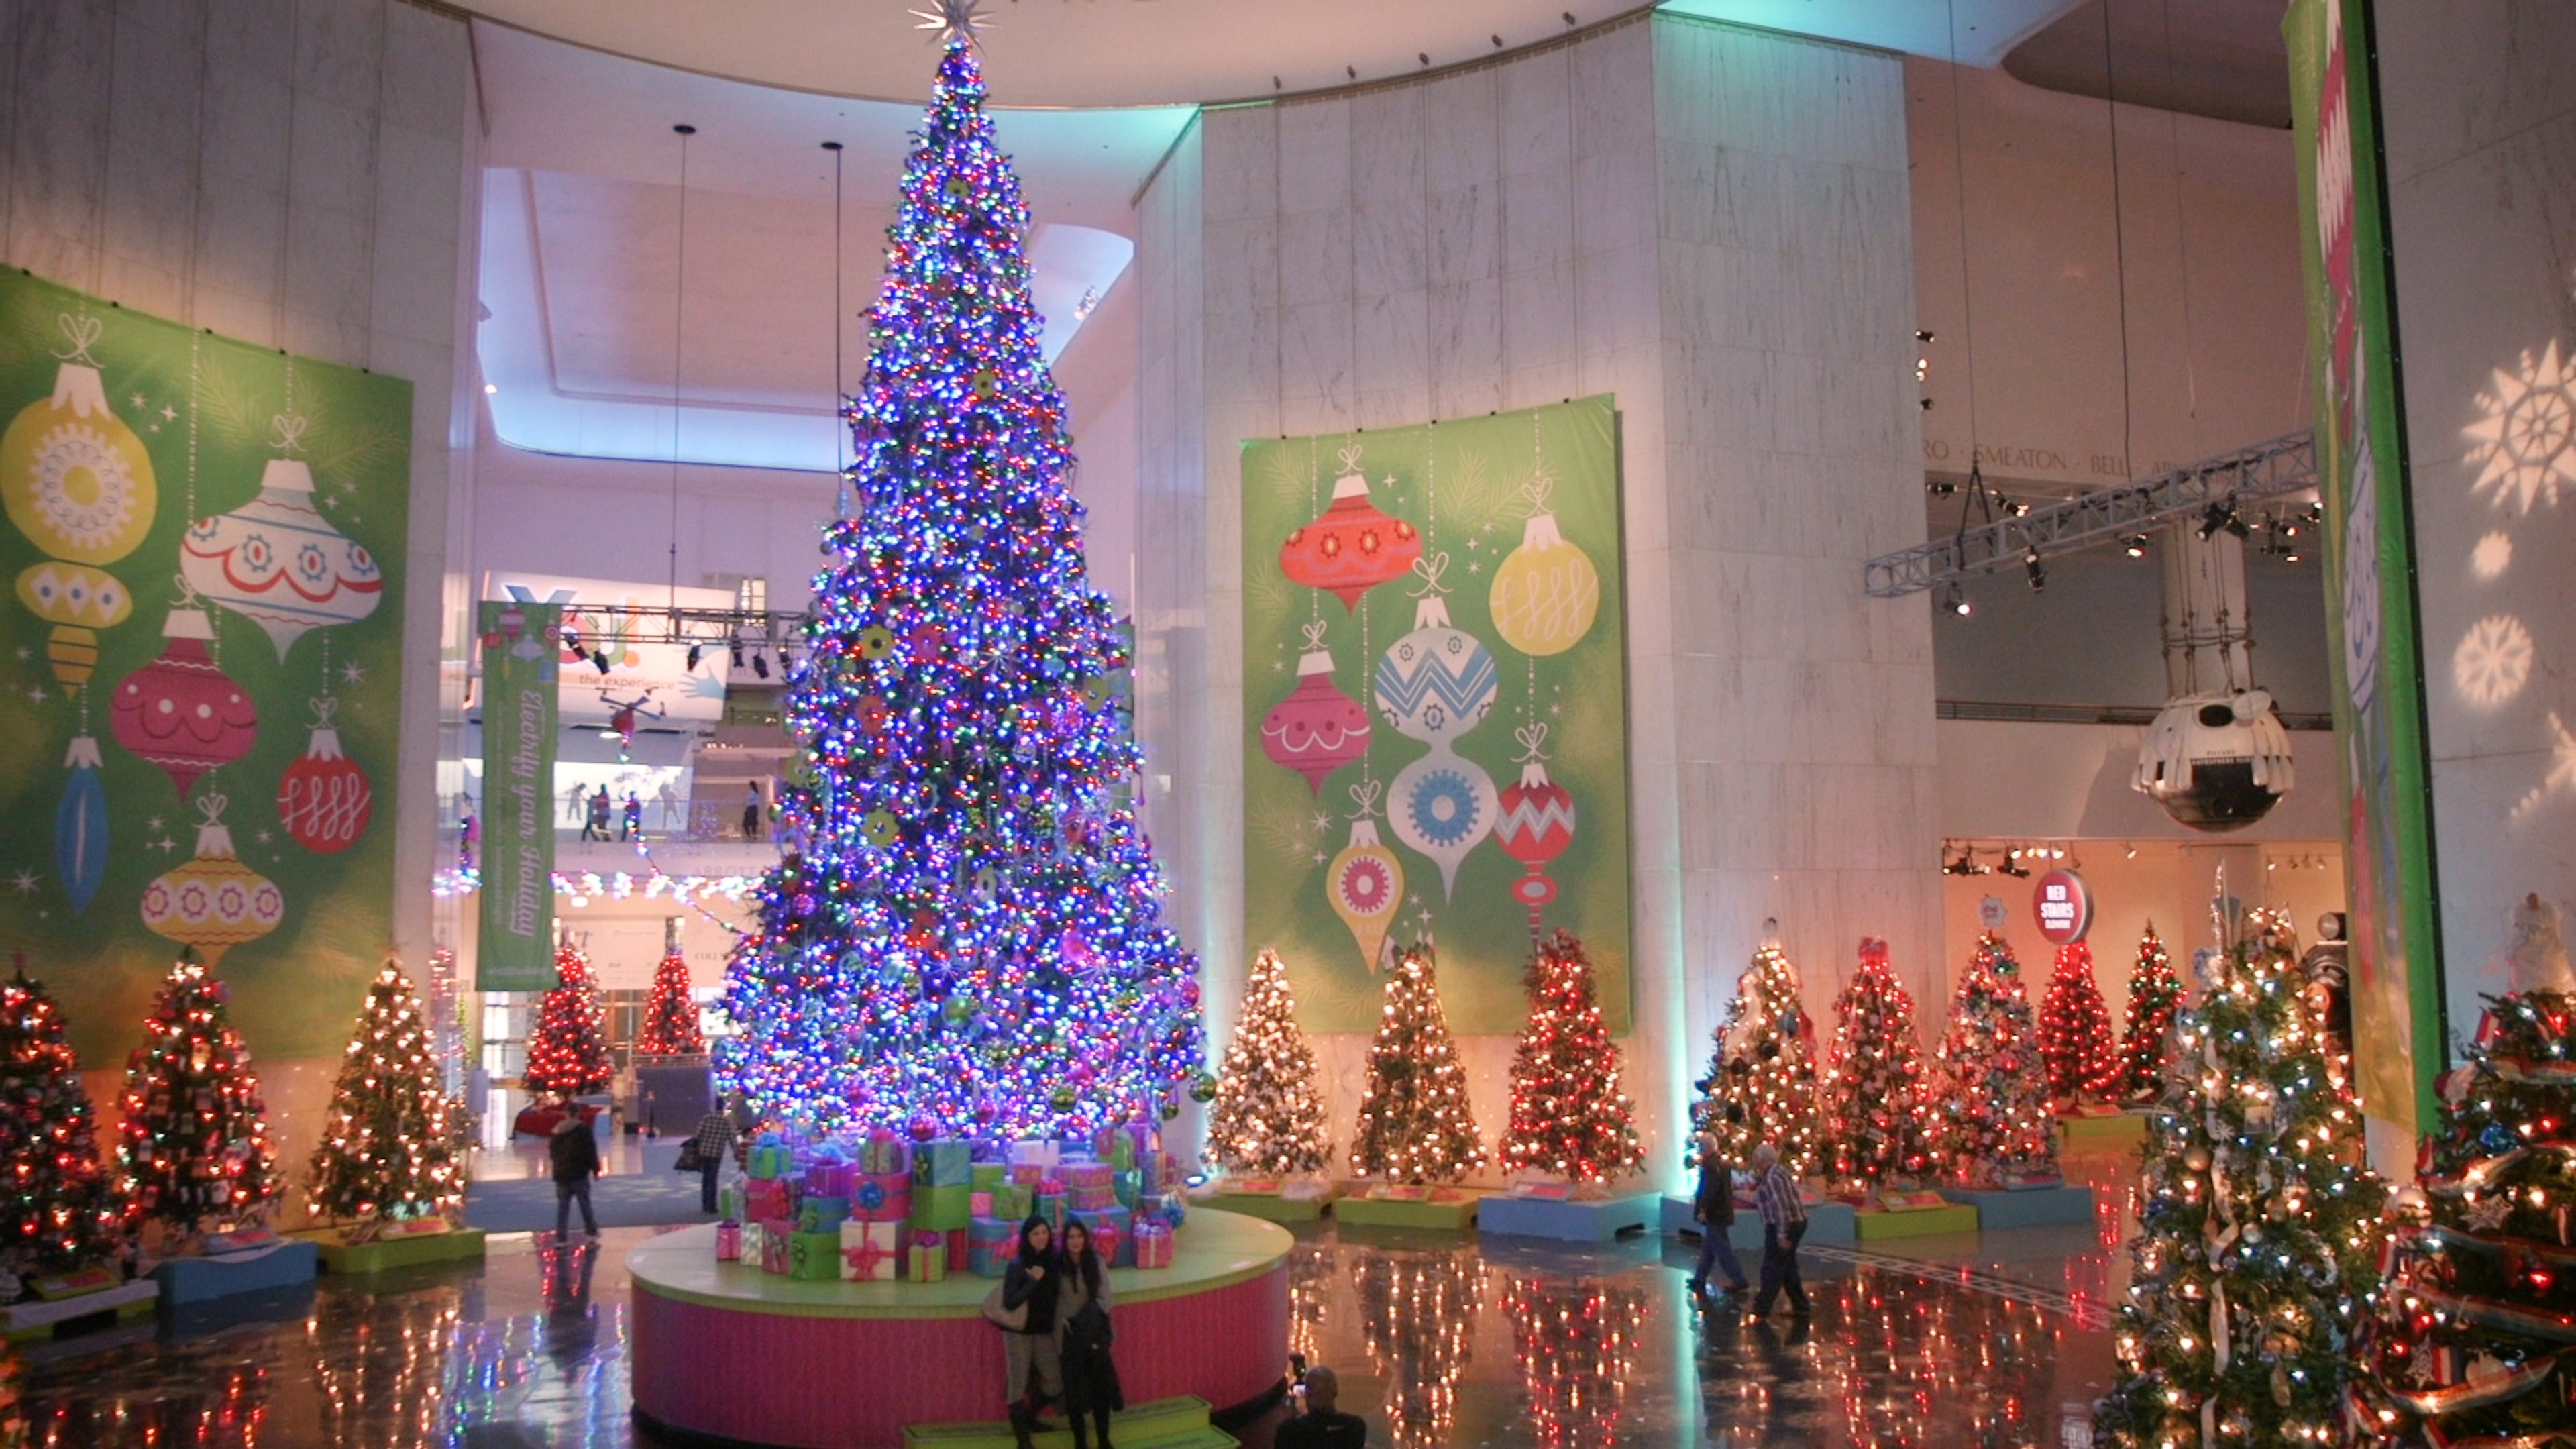 Chicago Christmas Tree Lighting 2019
 Christmas Around the World Museum of Science and Industry